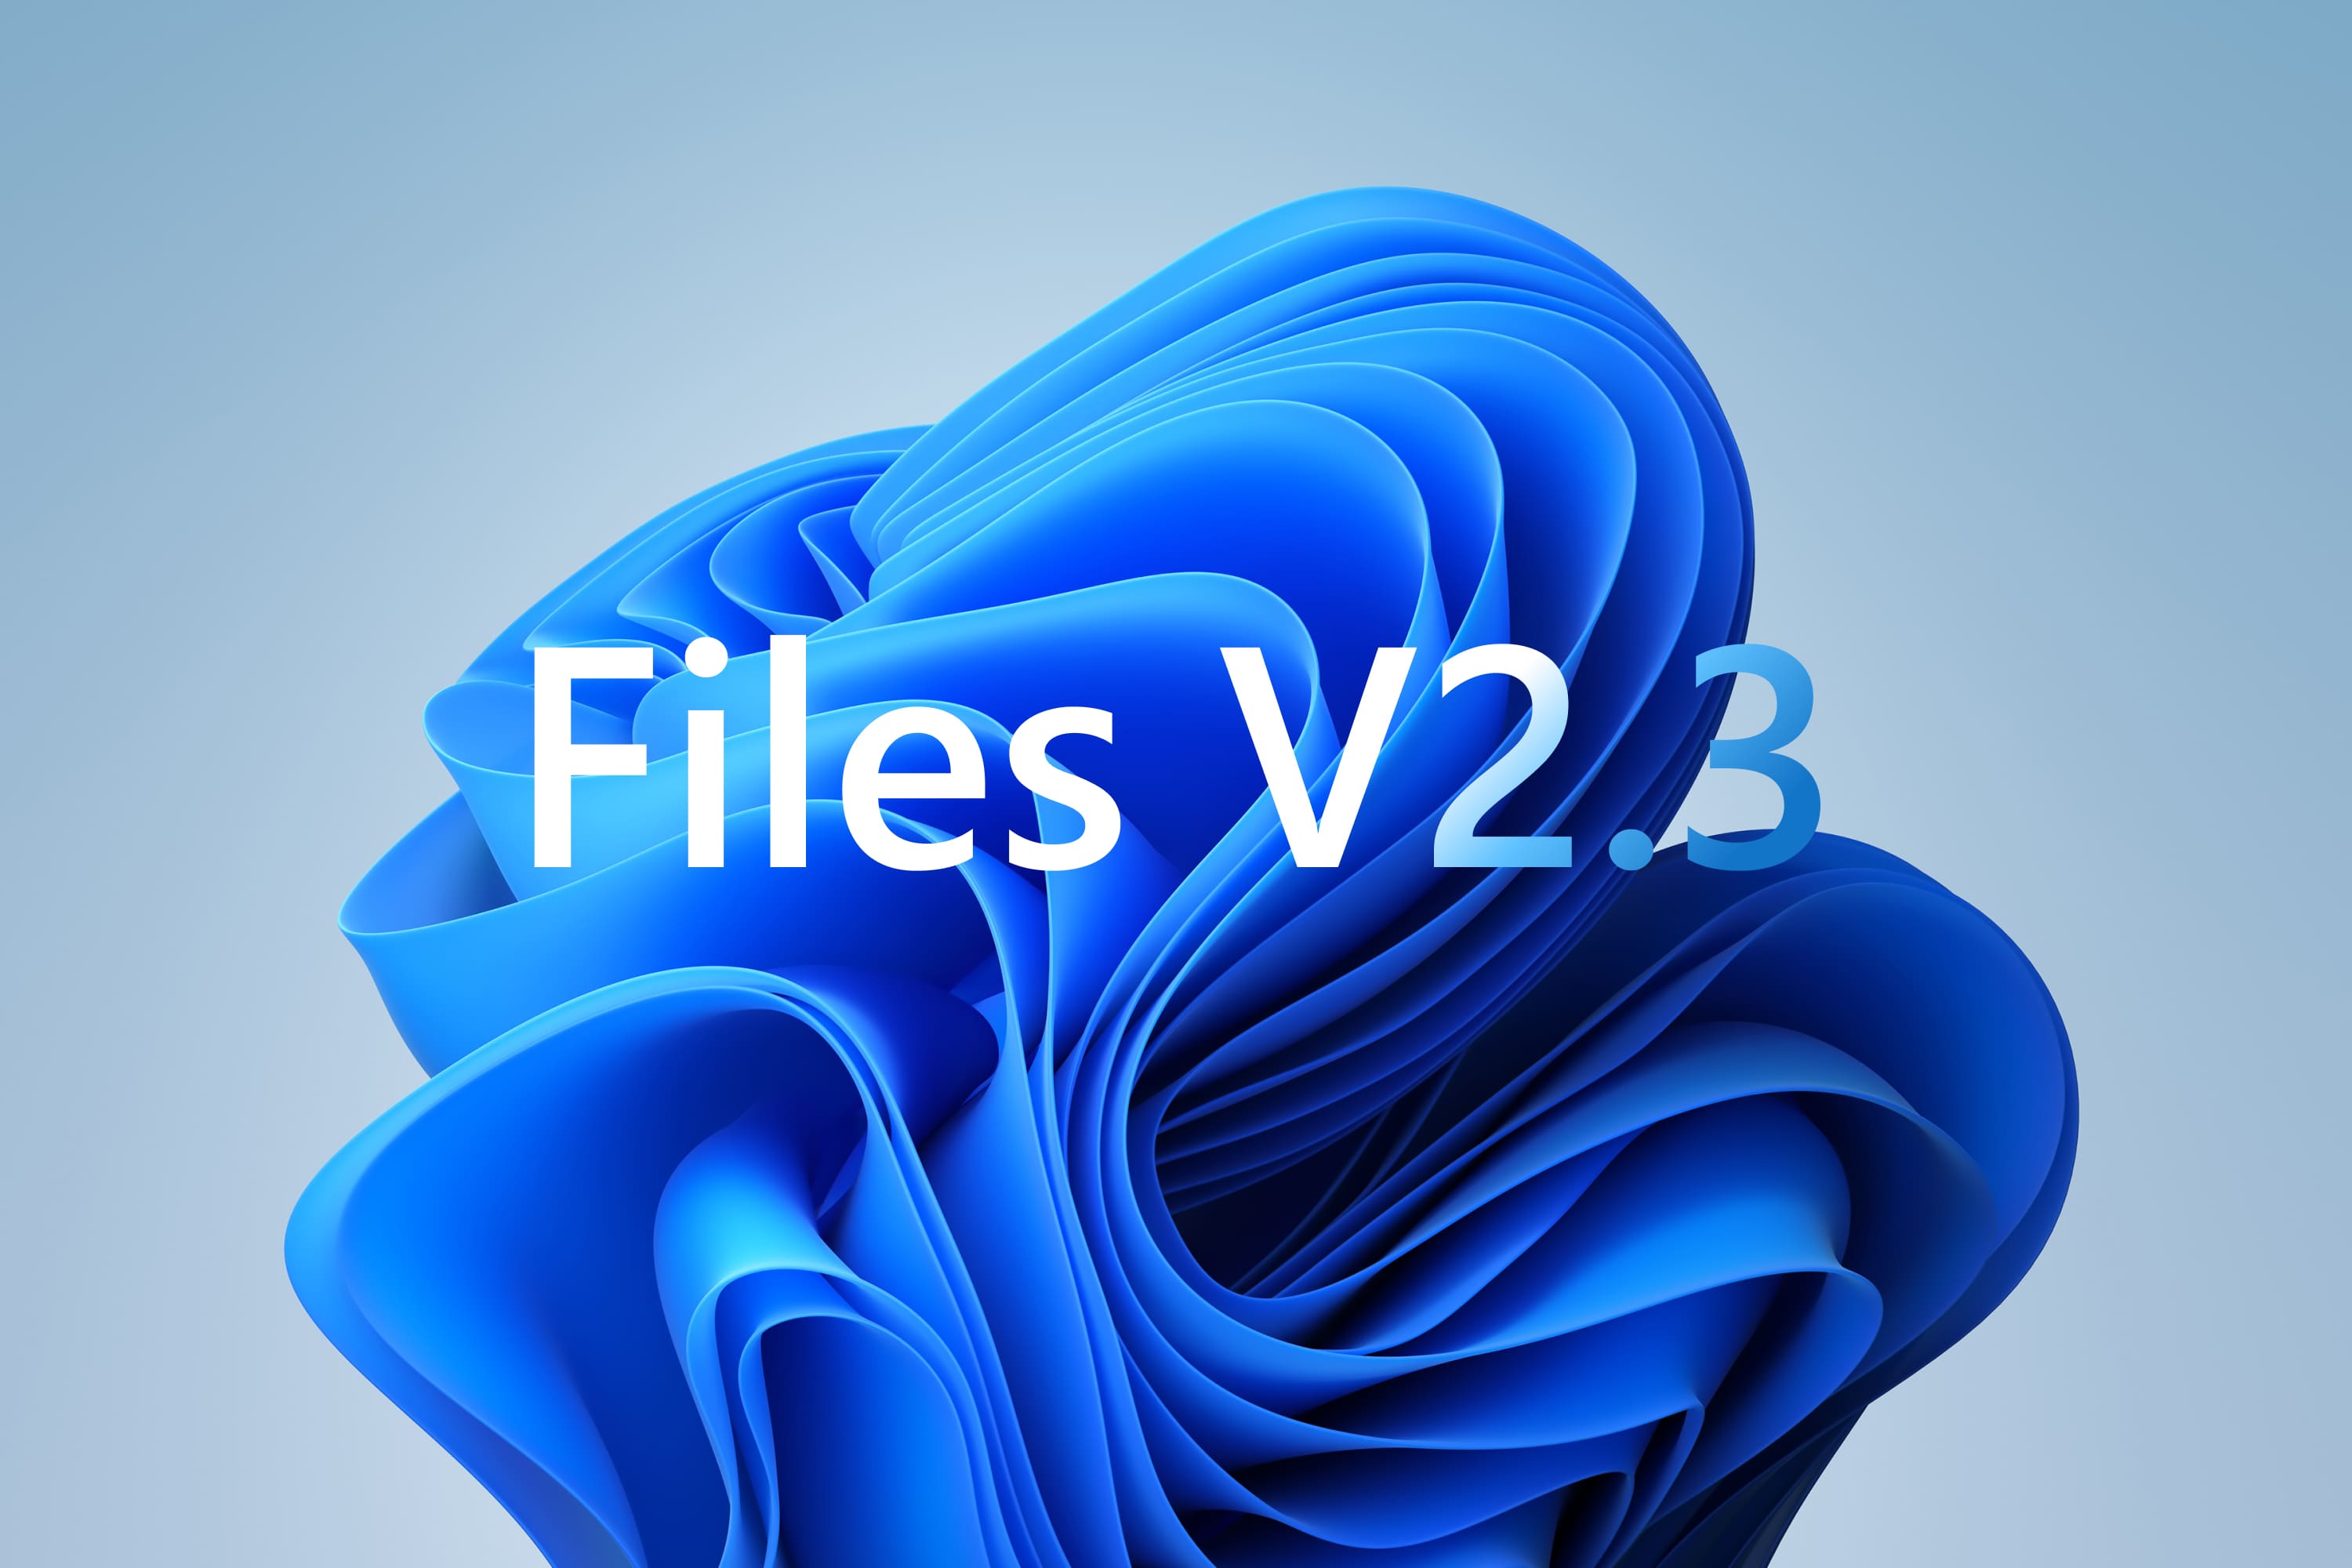 Introducing the next major release of Files - v2.3 thumbnail